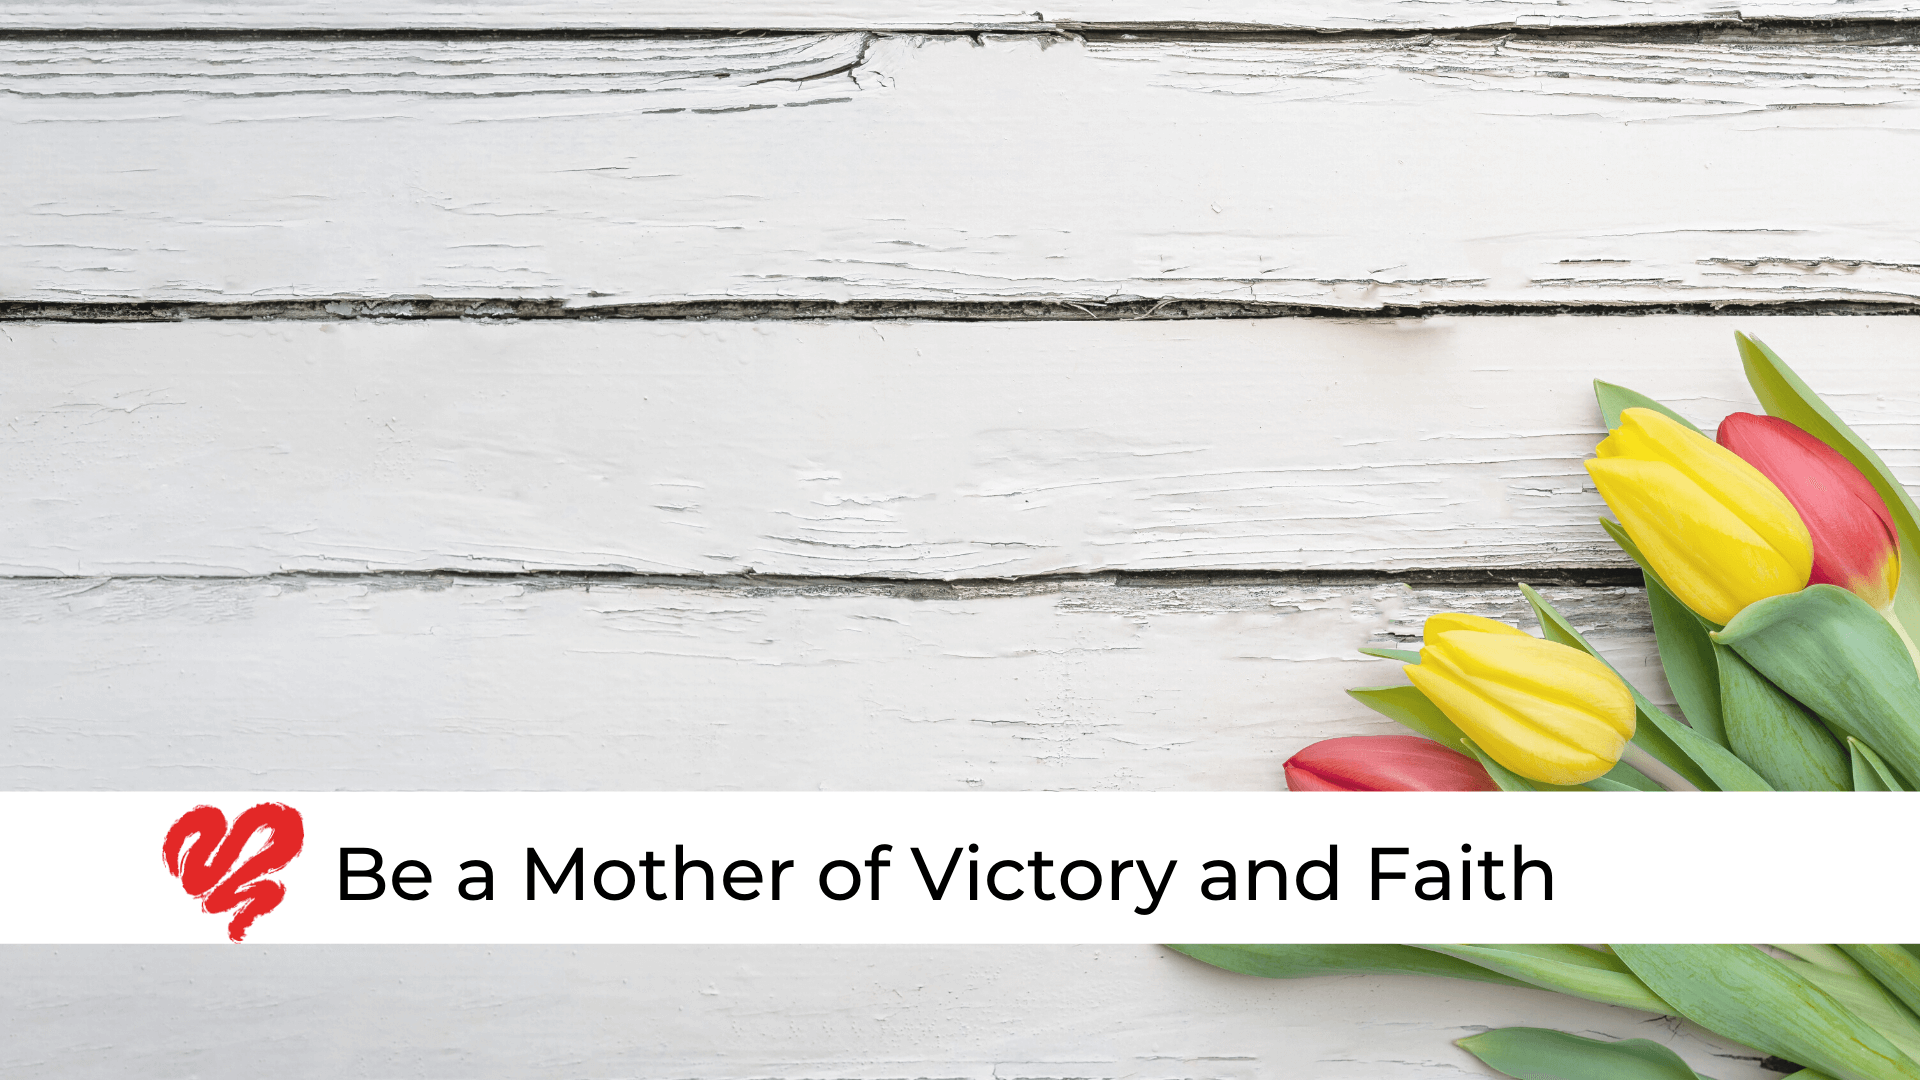 Be a Mother of Victory and Faith